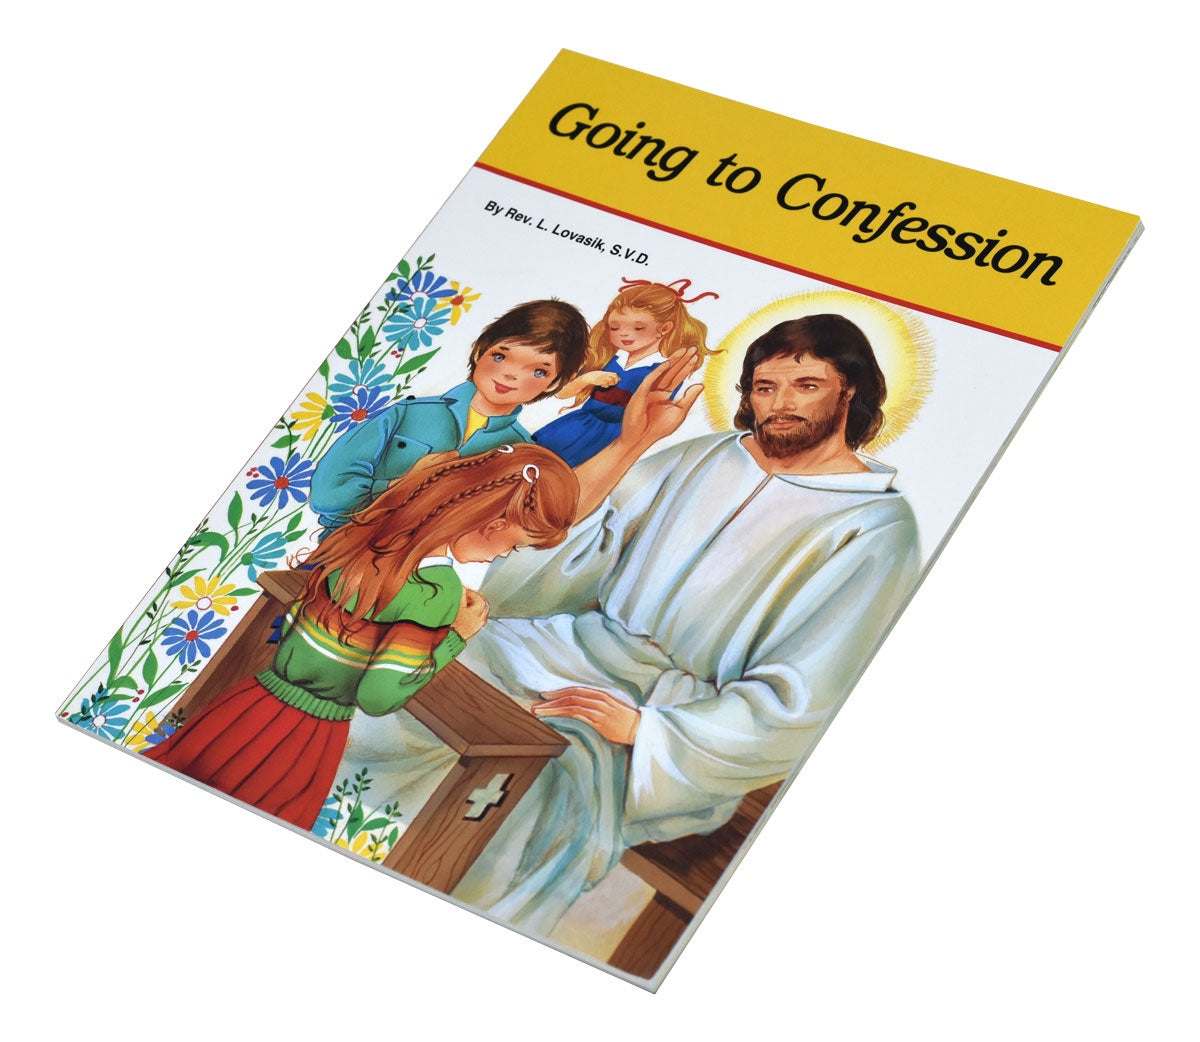 Going To Confession By Rev. Lawrence Lovasik